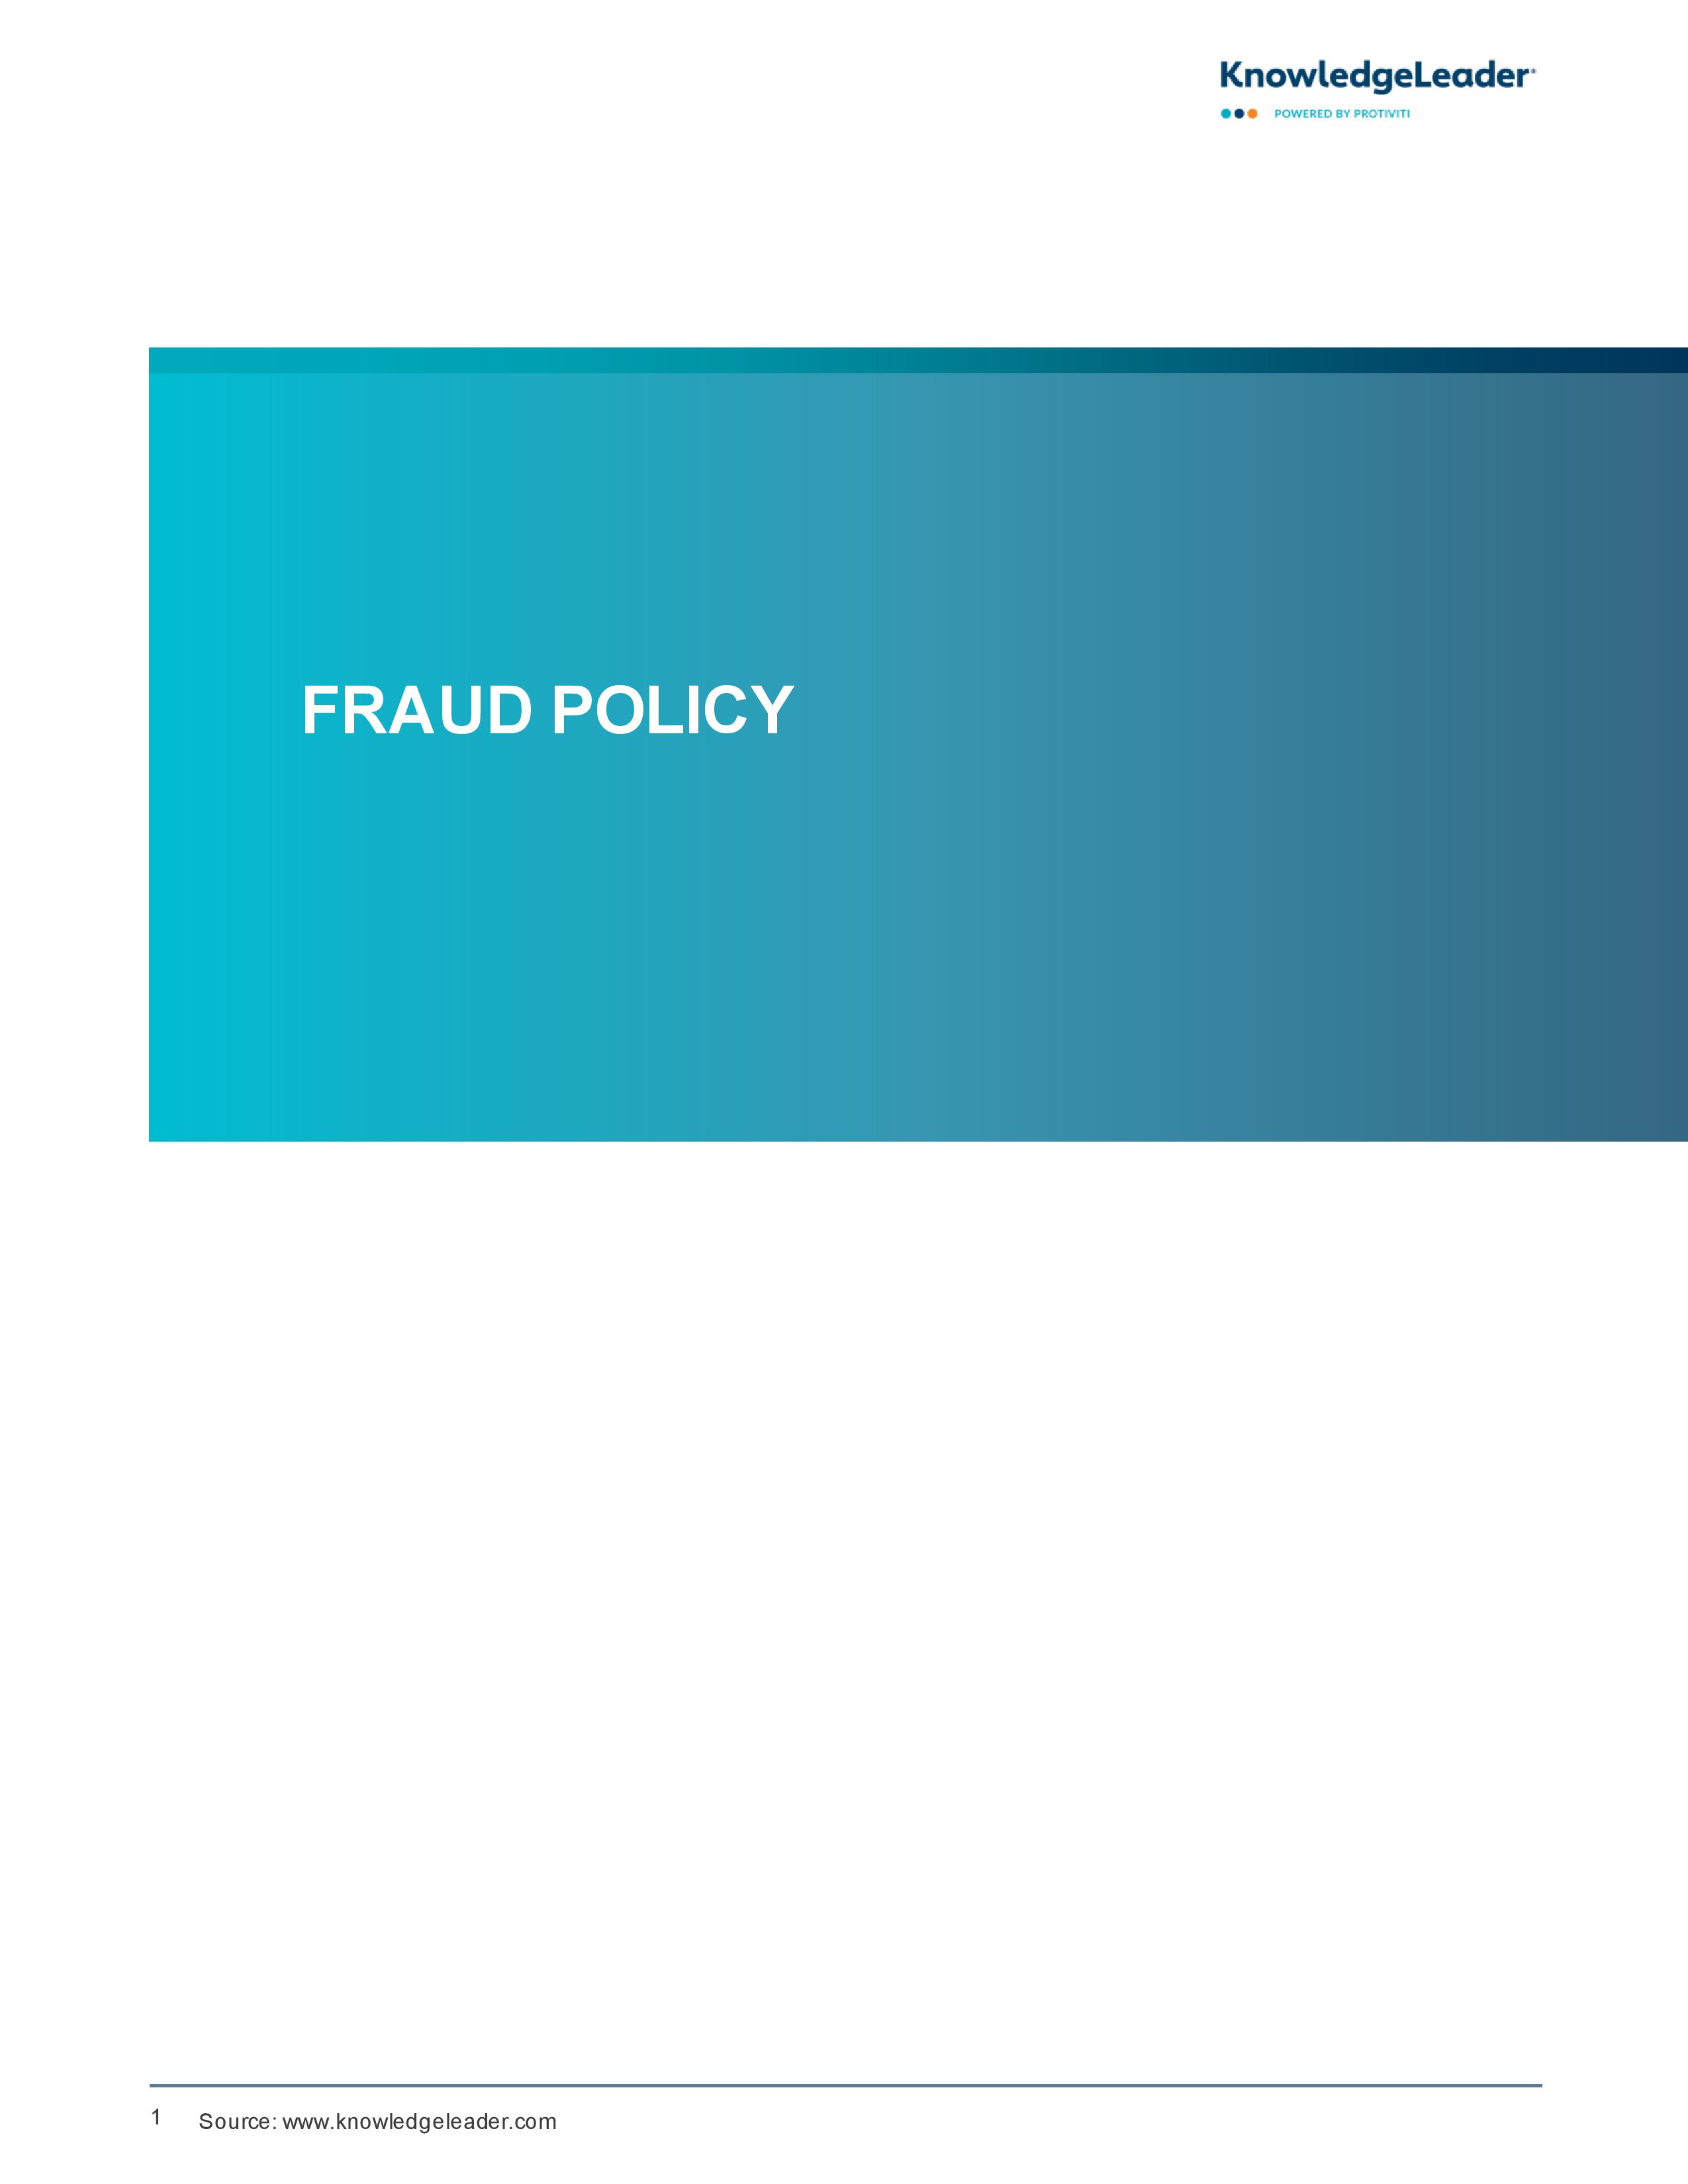 Screenshot of the first page of Fraud Policy